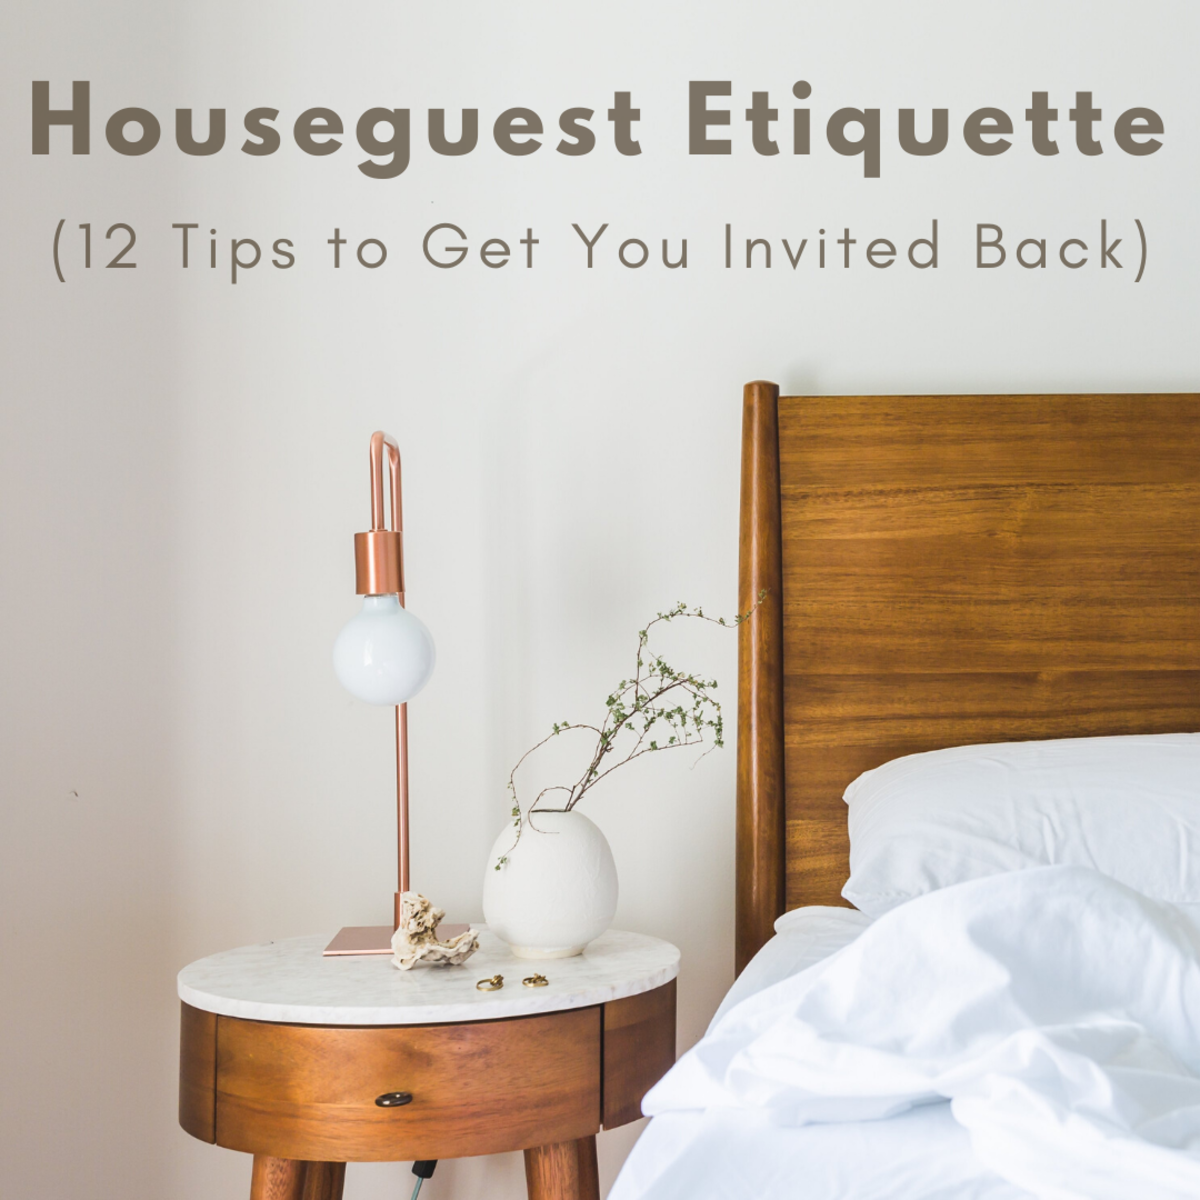 If you want to be the kind of houseguest that gets invited back, there are a few simple rules you need to follow.